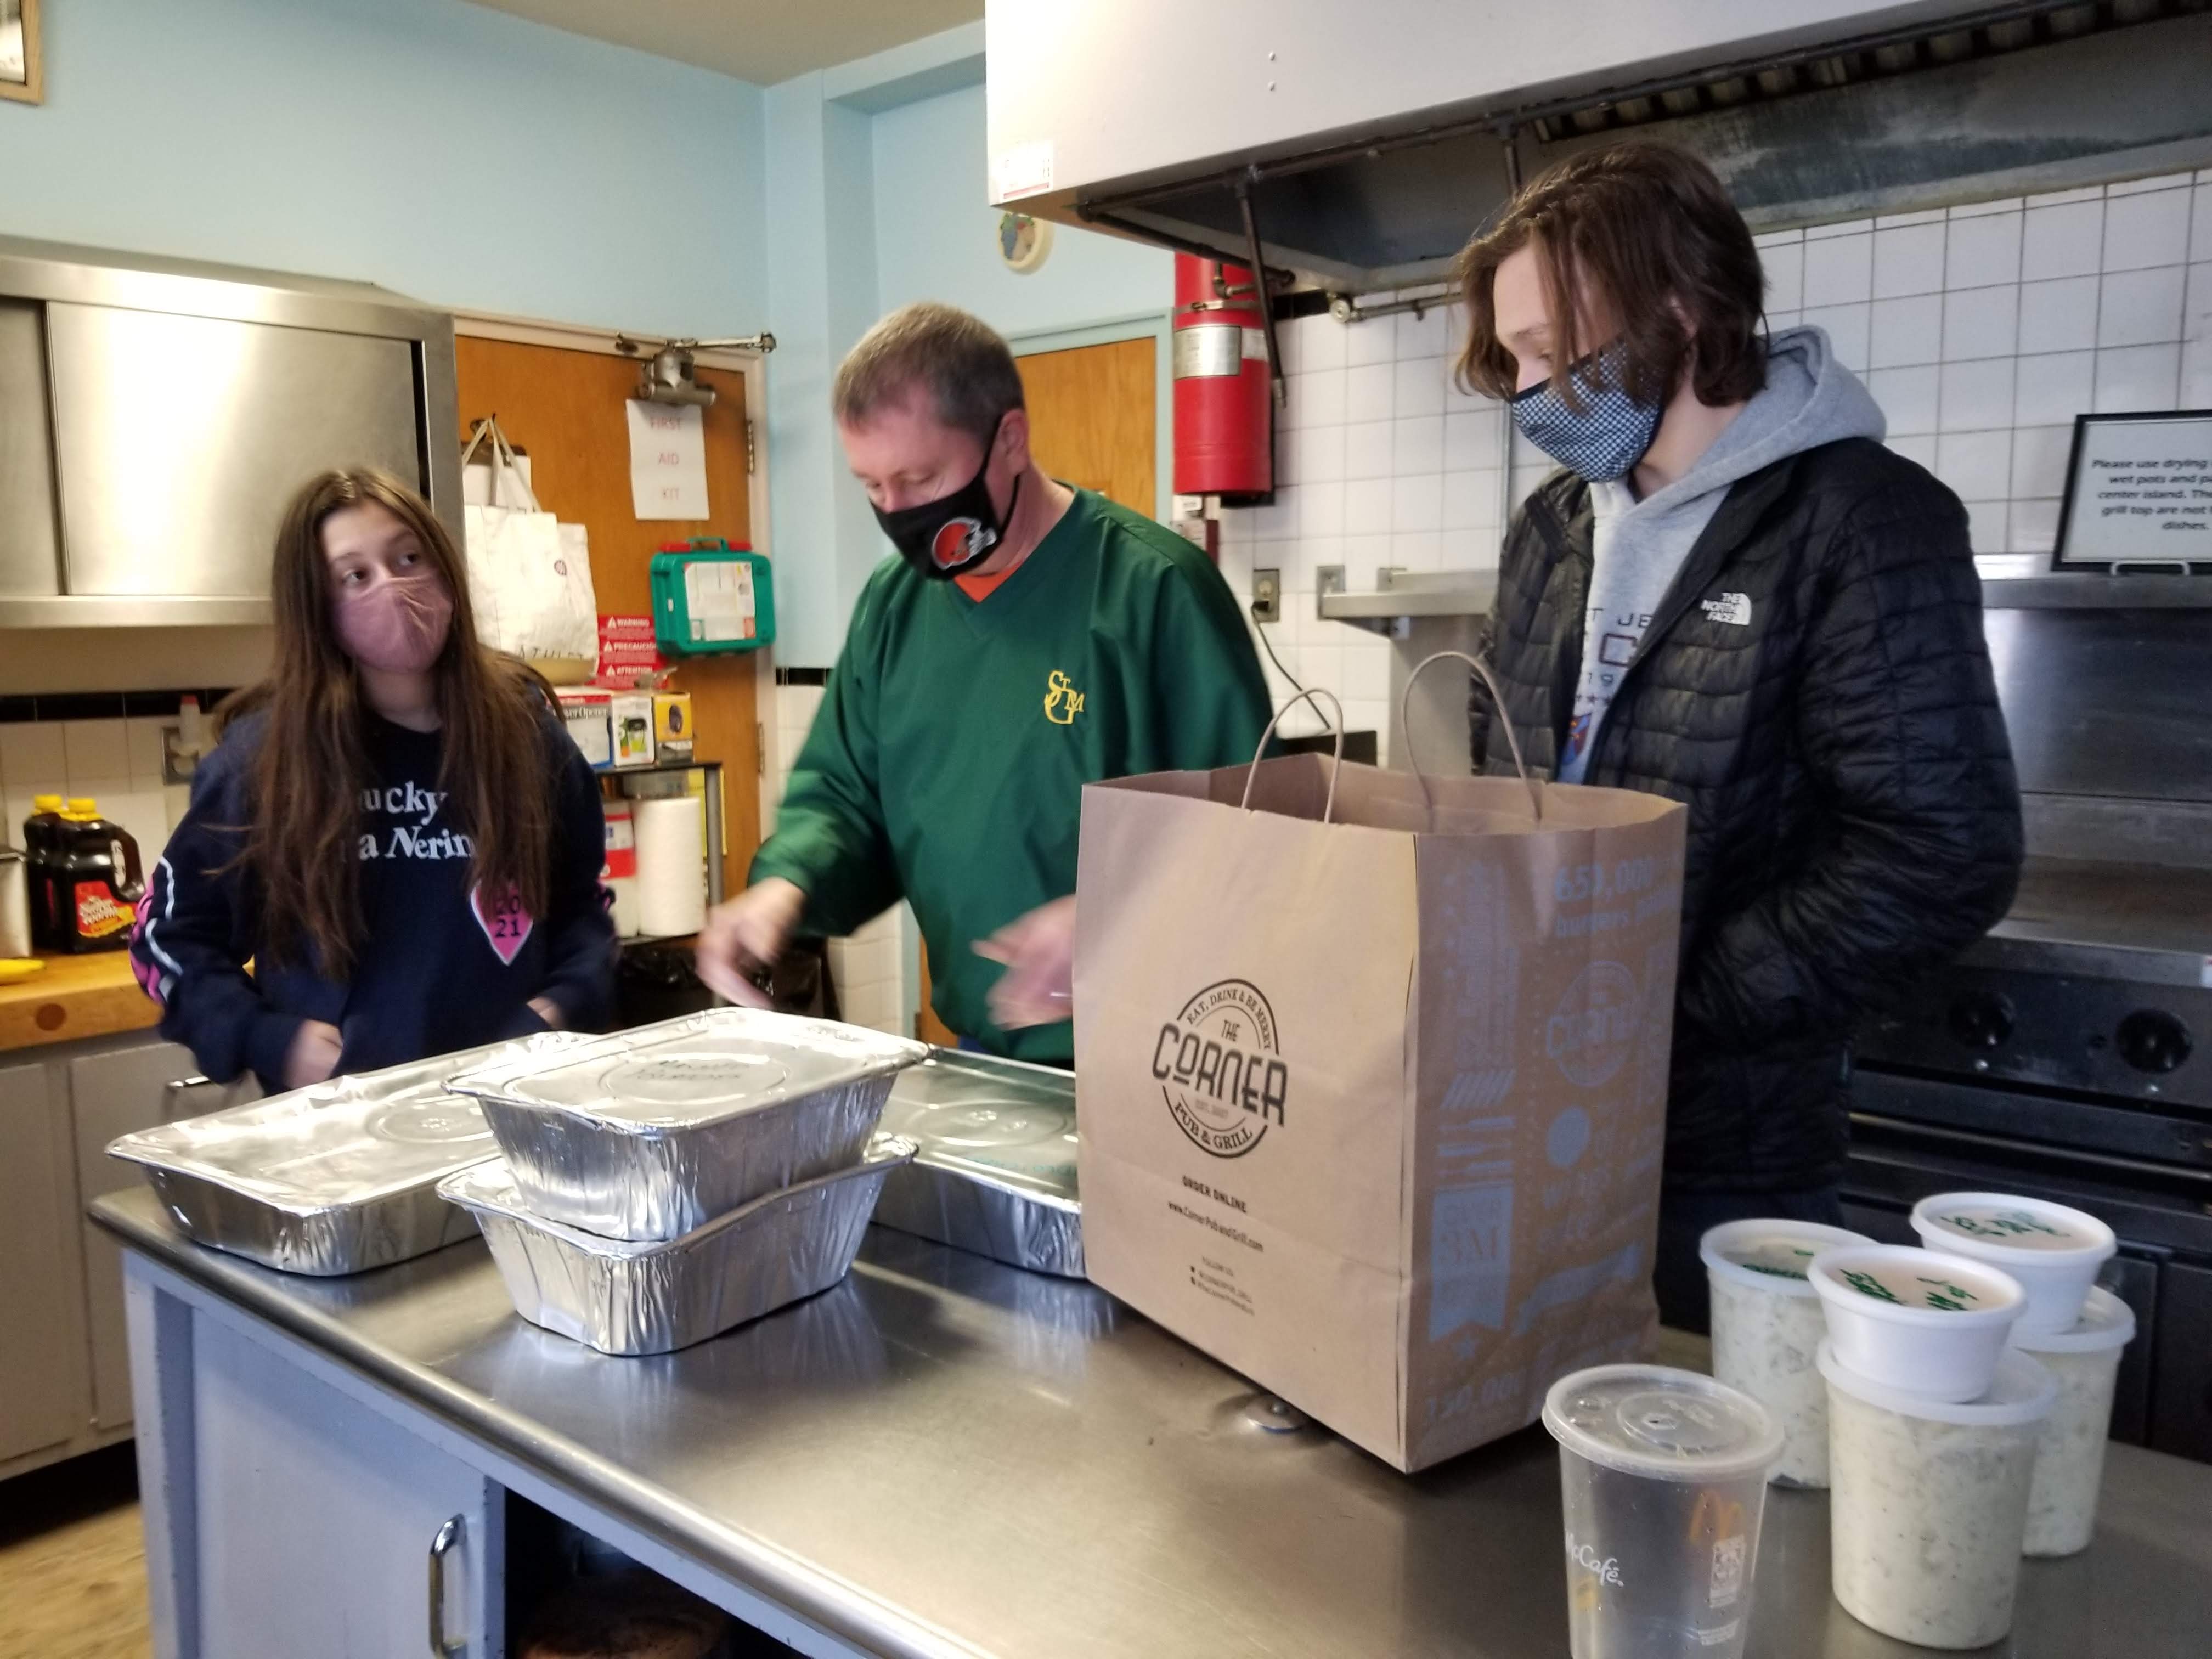 Scott Rockafellow, his daughter, Tess and son, Max, pick up orders that are ready for delivery to three Caritas Connections clients